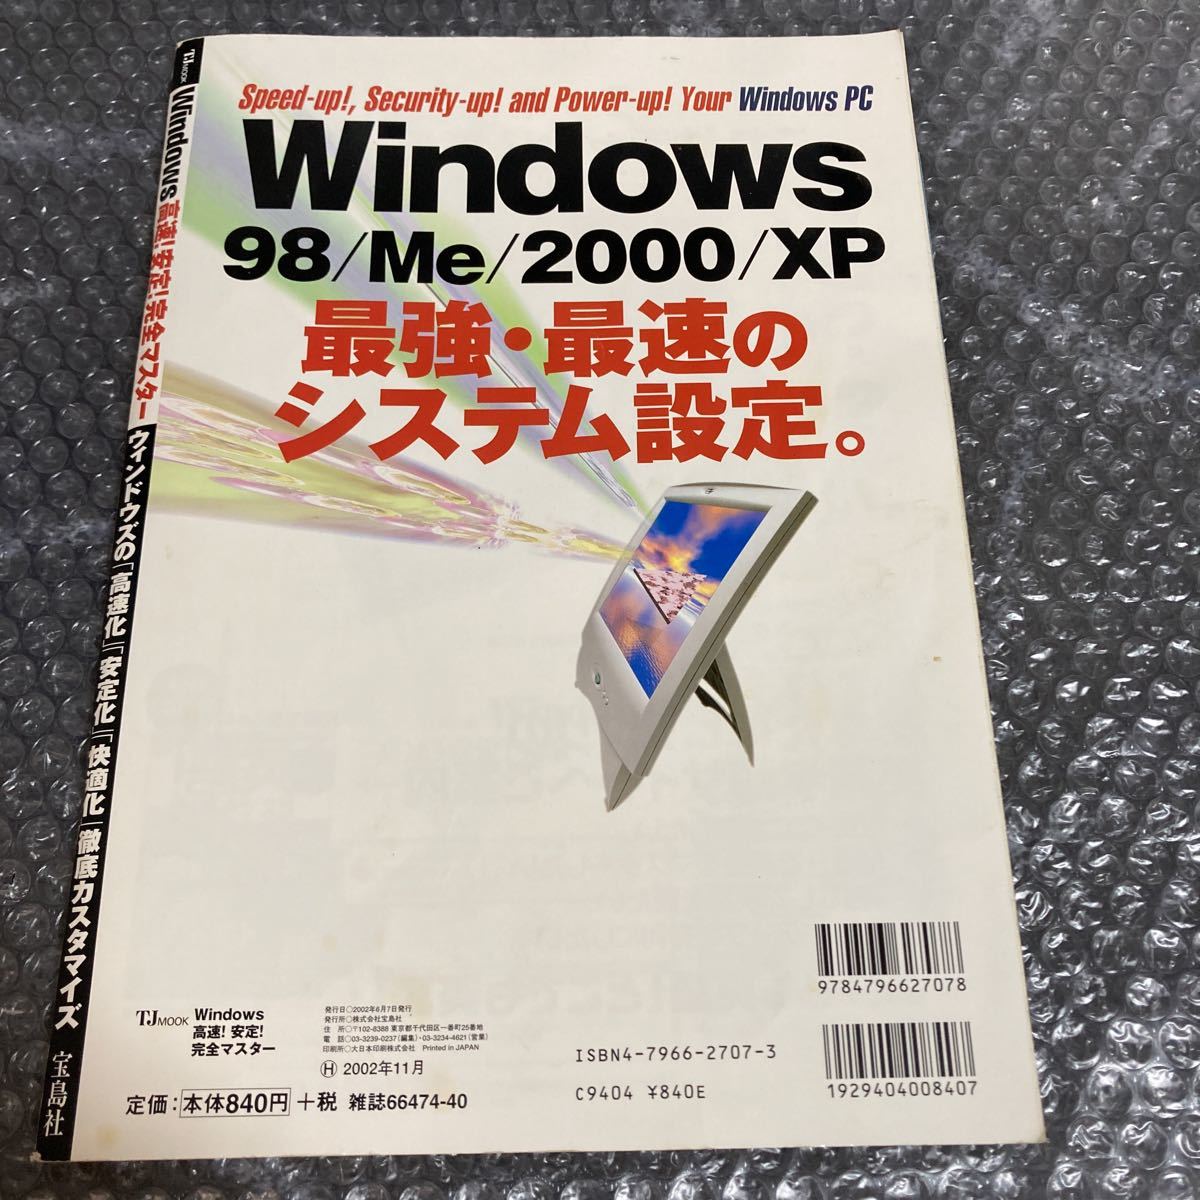 book@Windows high speed! stability! complete master 98/Me/2000/XP strongest * fastest. system setting. "Treasure Island" company 